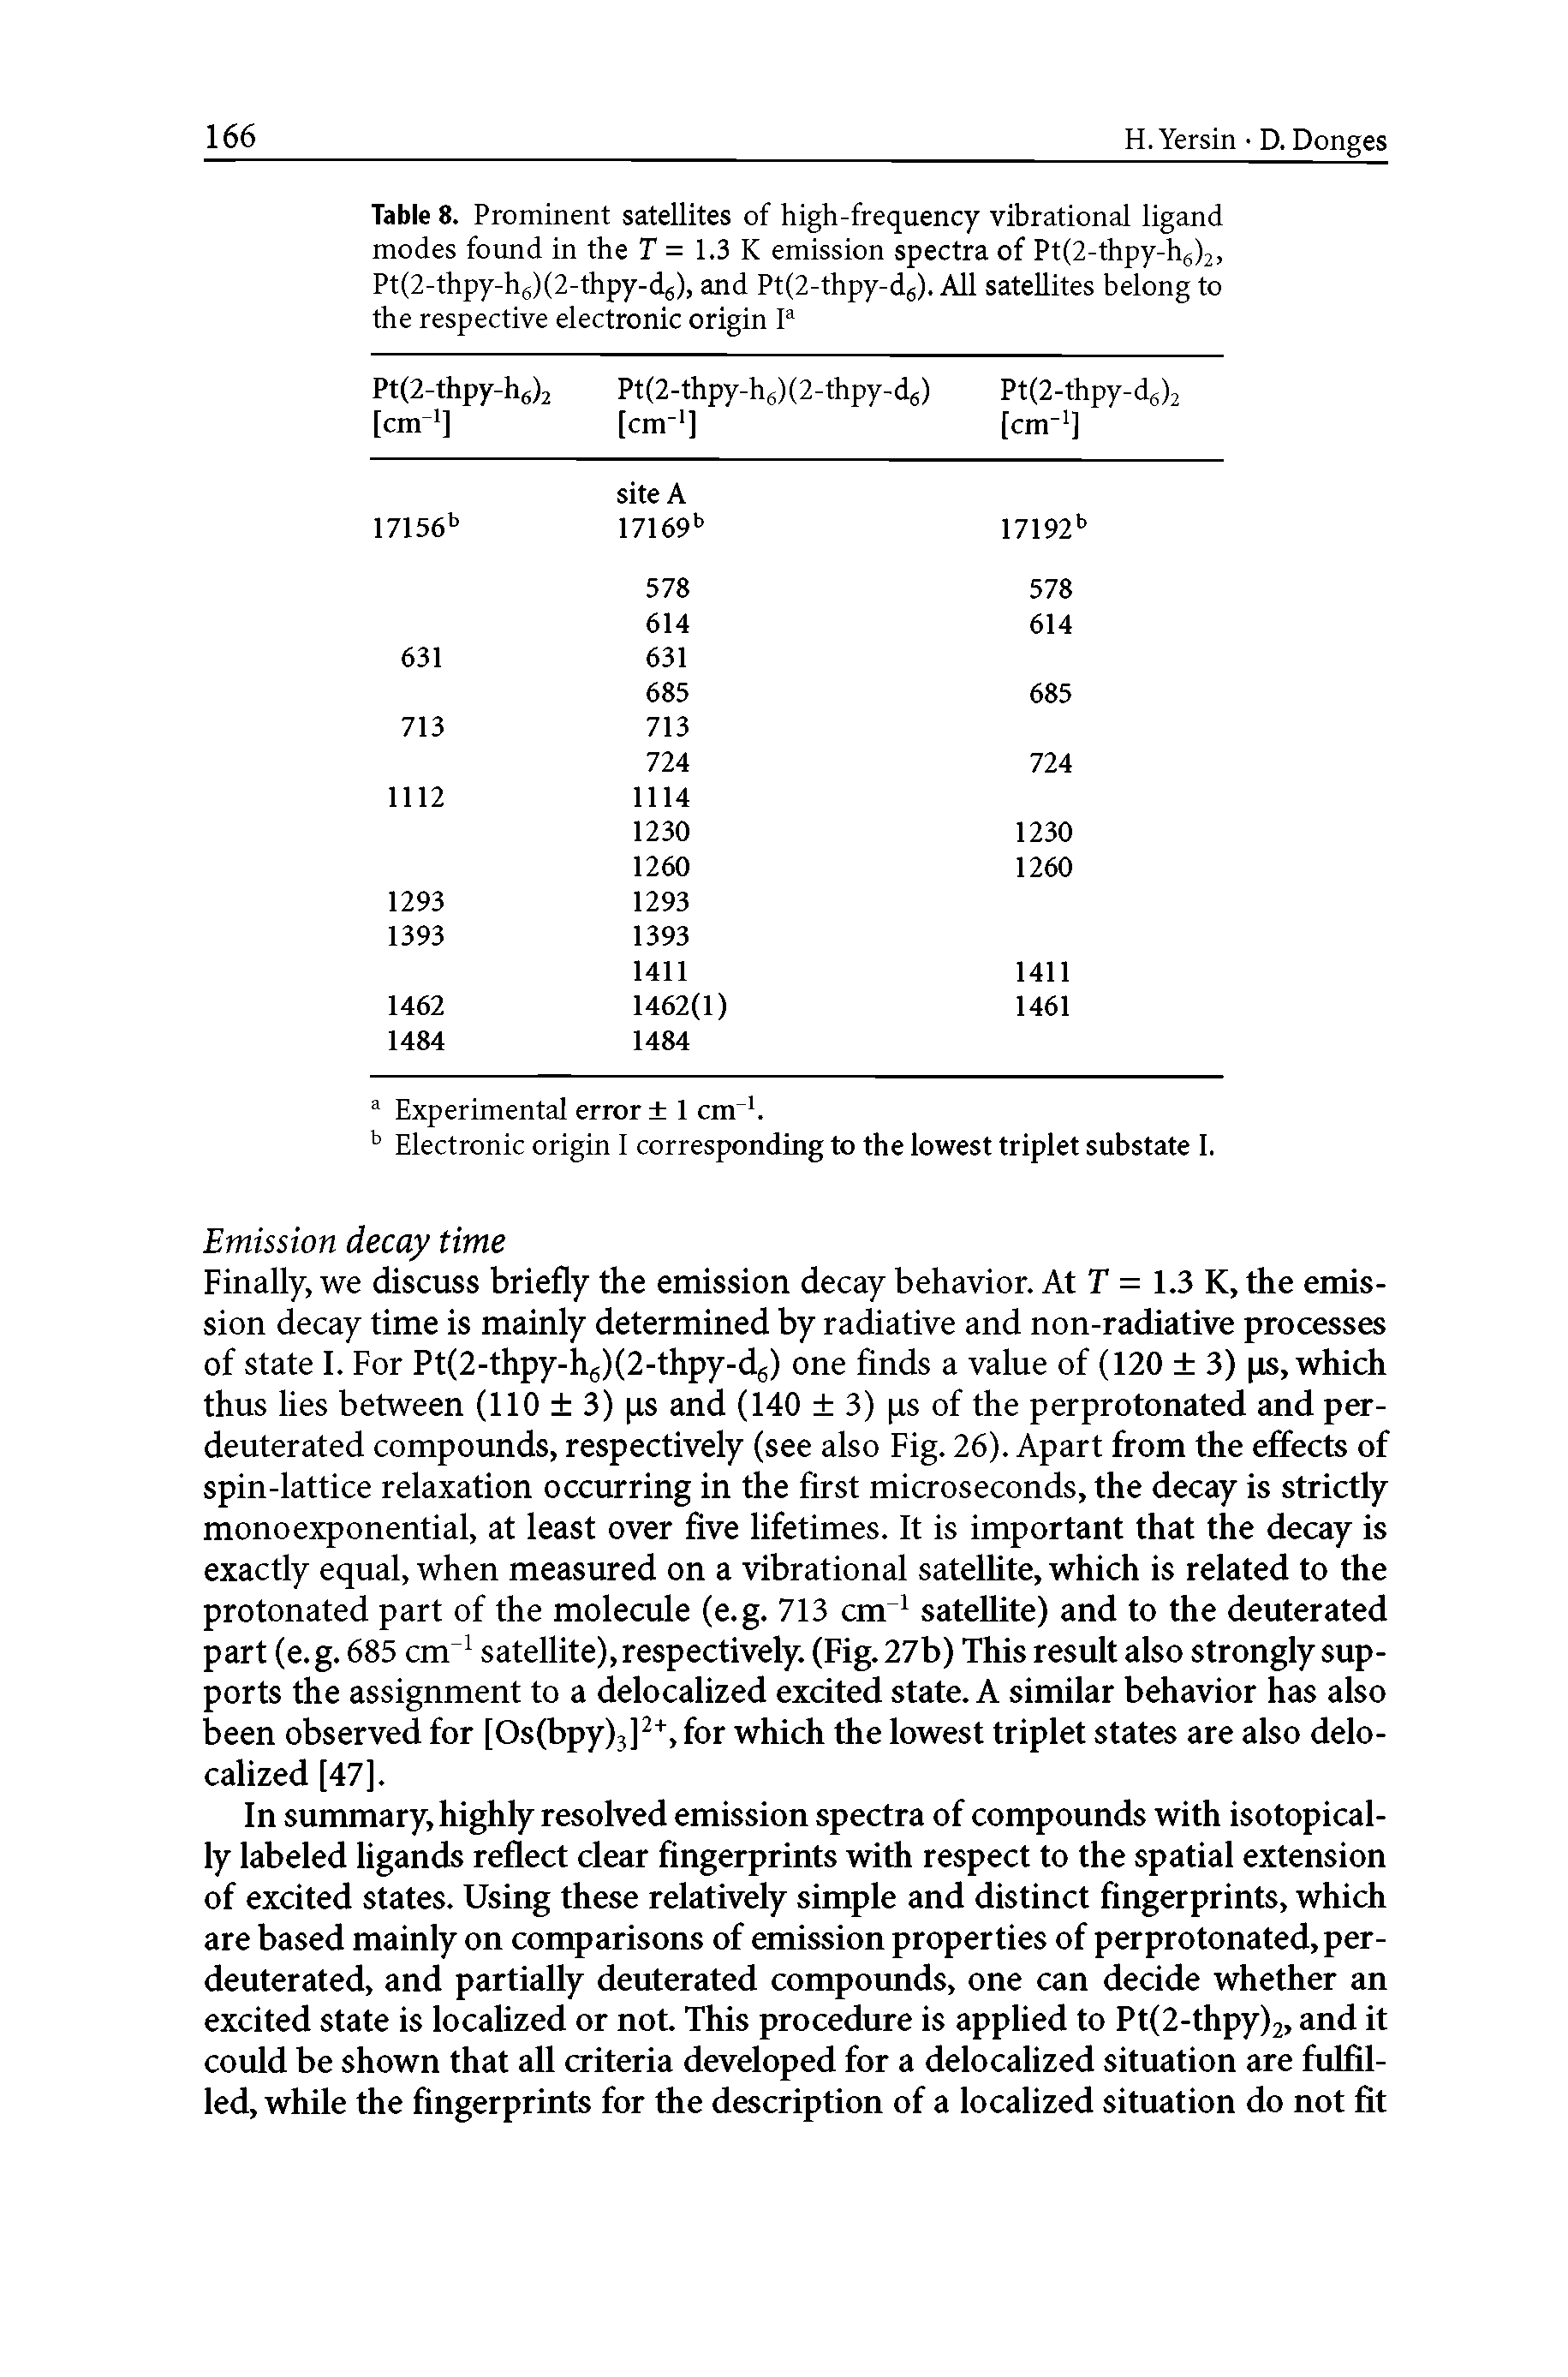 Table 8. Prominent satellites of high-frequency vibrational ligand modes found in the T = 1.3 K emission spectra of Pt(2-thpy-h(j)2, Pt(2-thpy-h(j)(2-thpy-d5), and Pt(2-thpy-d5). All satellites belong to the respective electronic origin P...